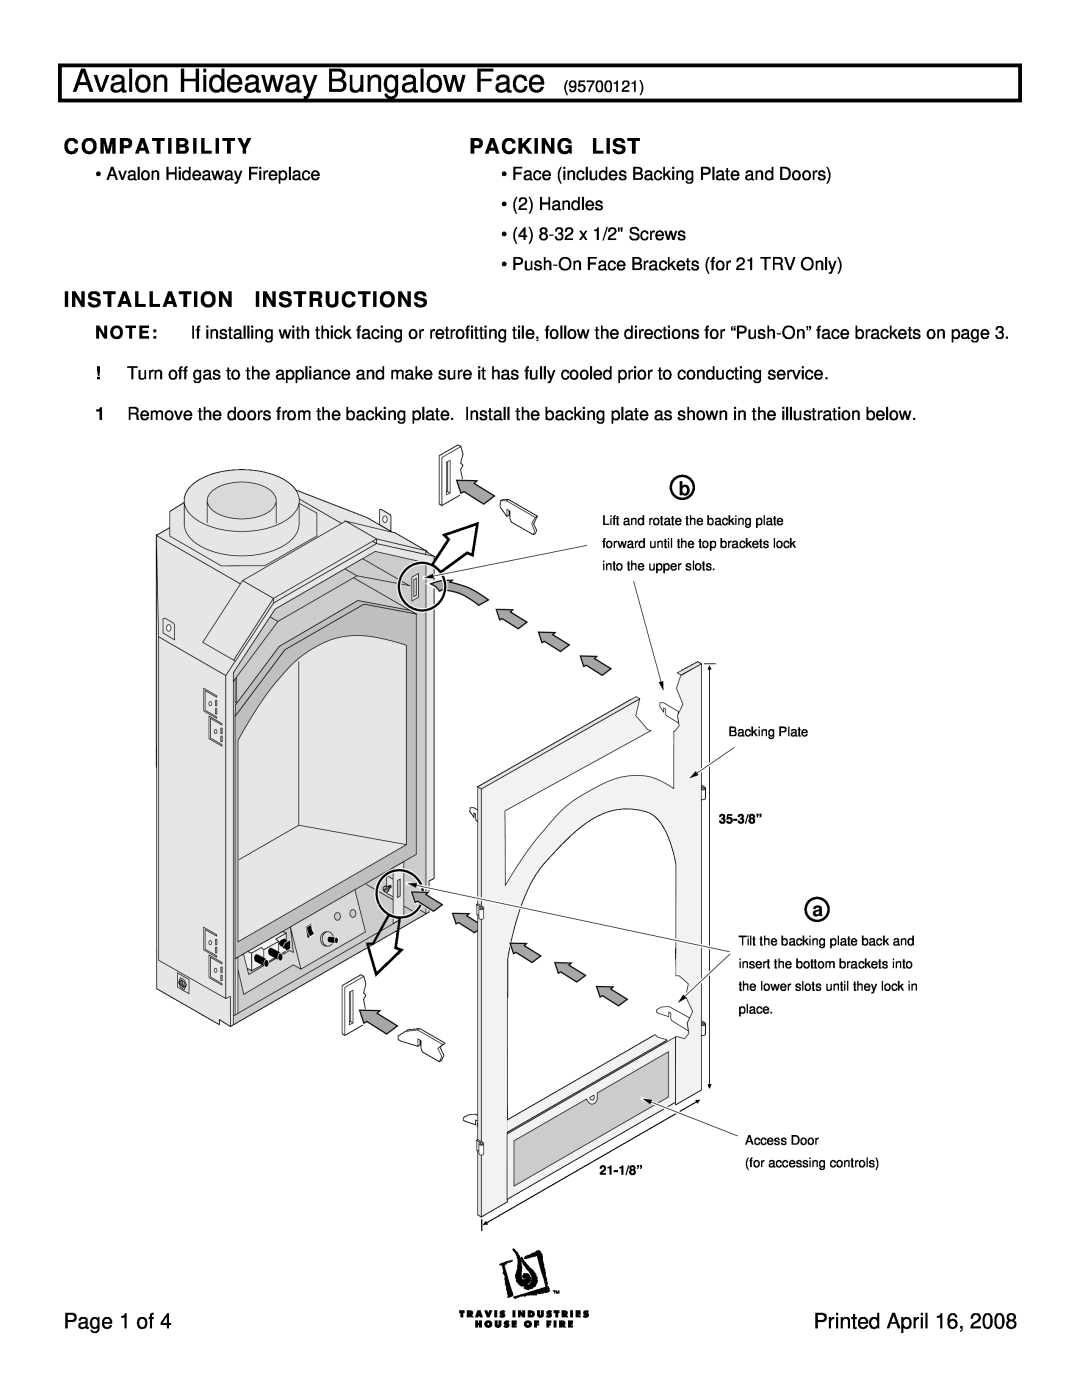 Avalon Stoves 21 TRV installation instructions Avalon Hideaway Bungalow Face, C O M P A T I B I L I T Y, Packing List 